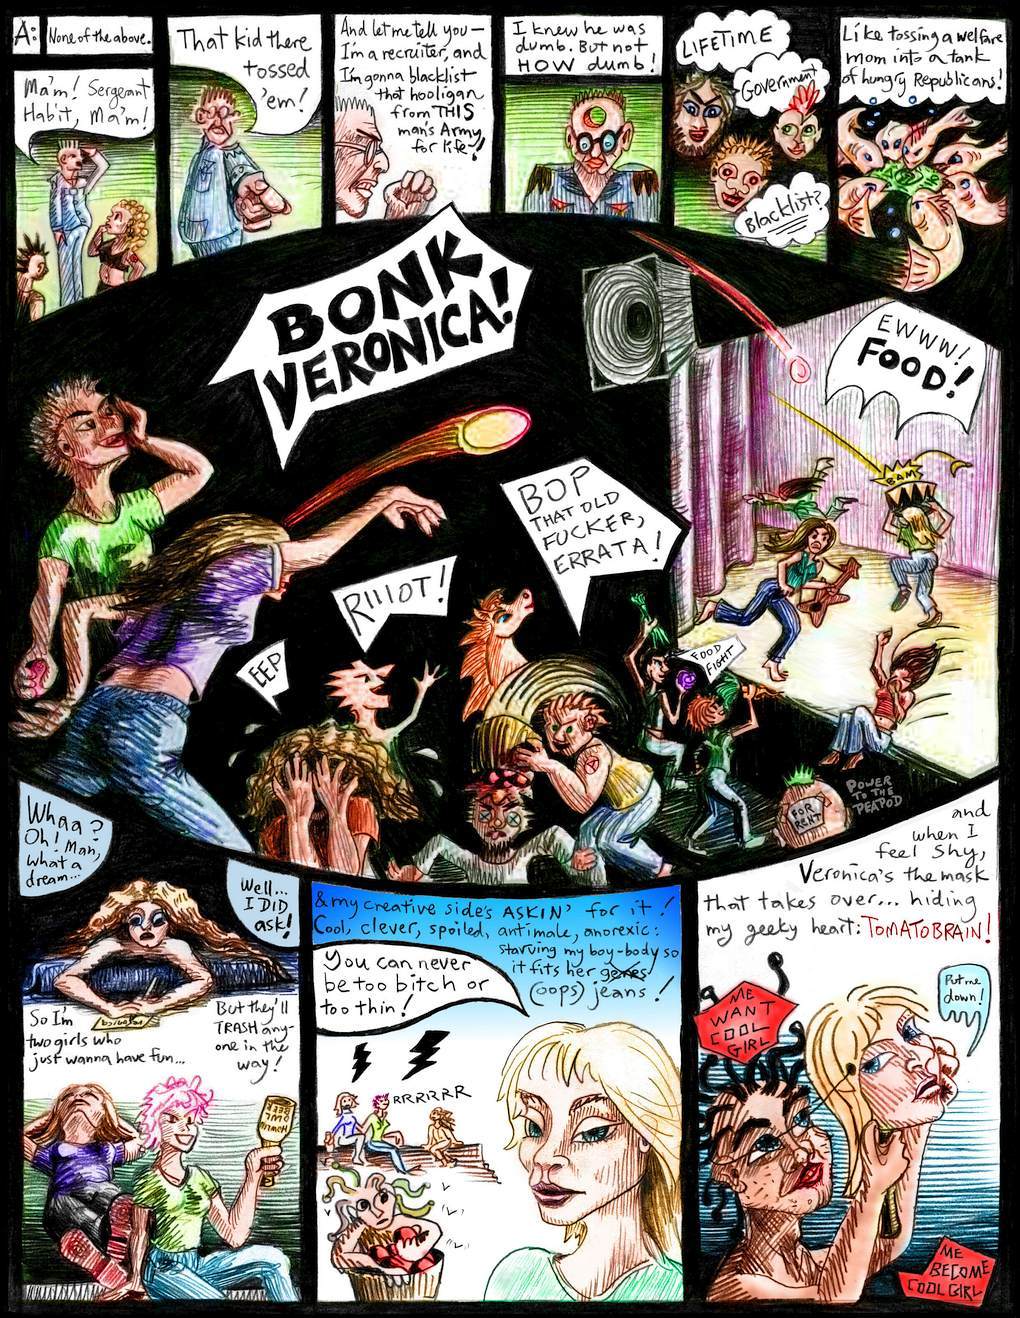 Comic of a dream by Chris Wayan about anorexia. Food fight in the punk club of my dreams.